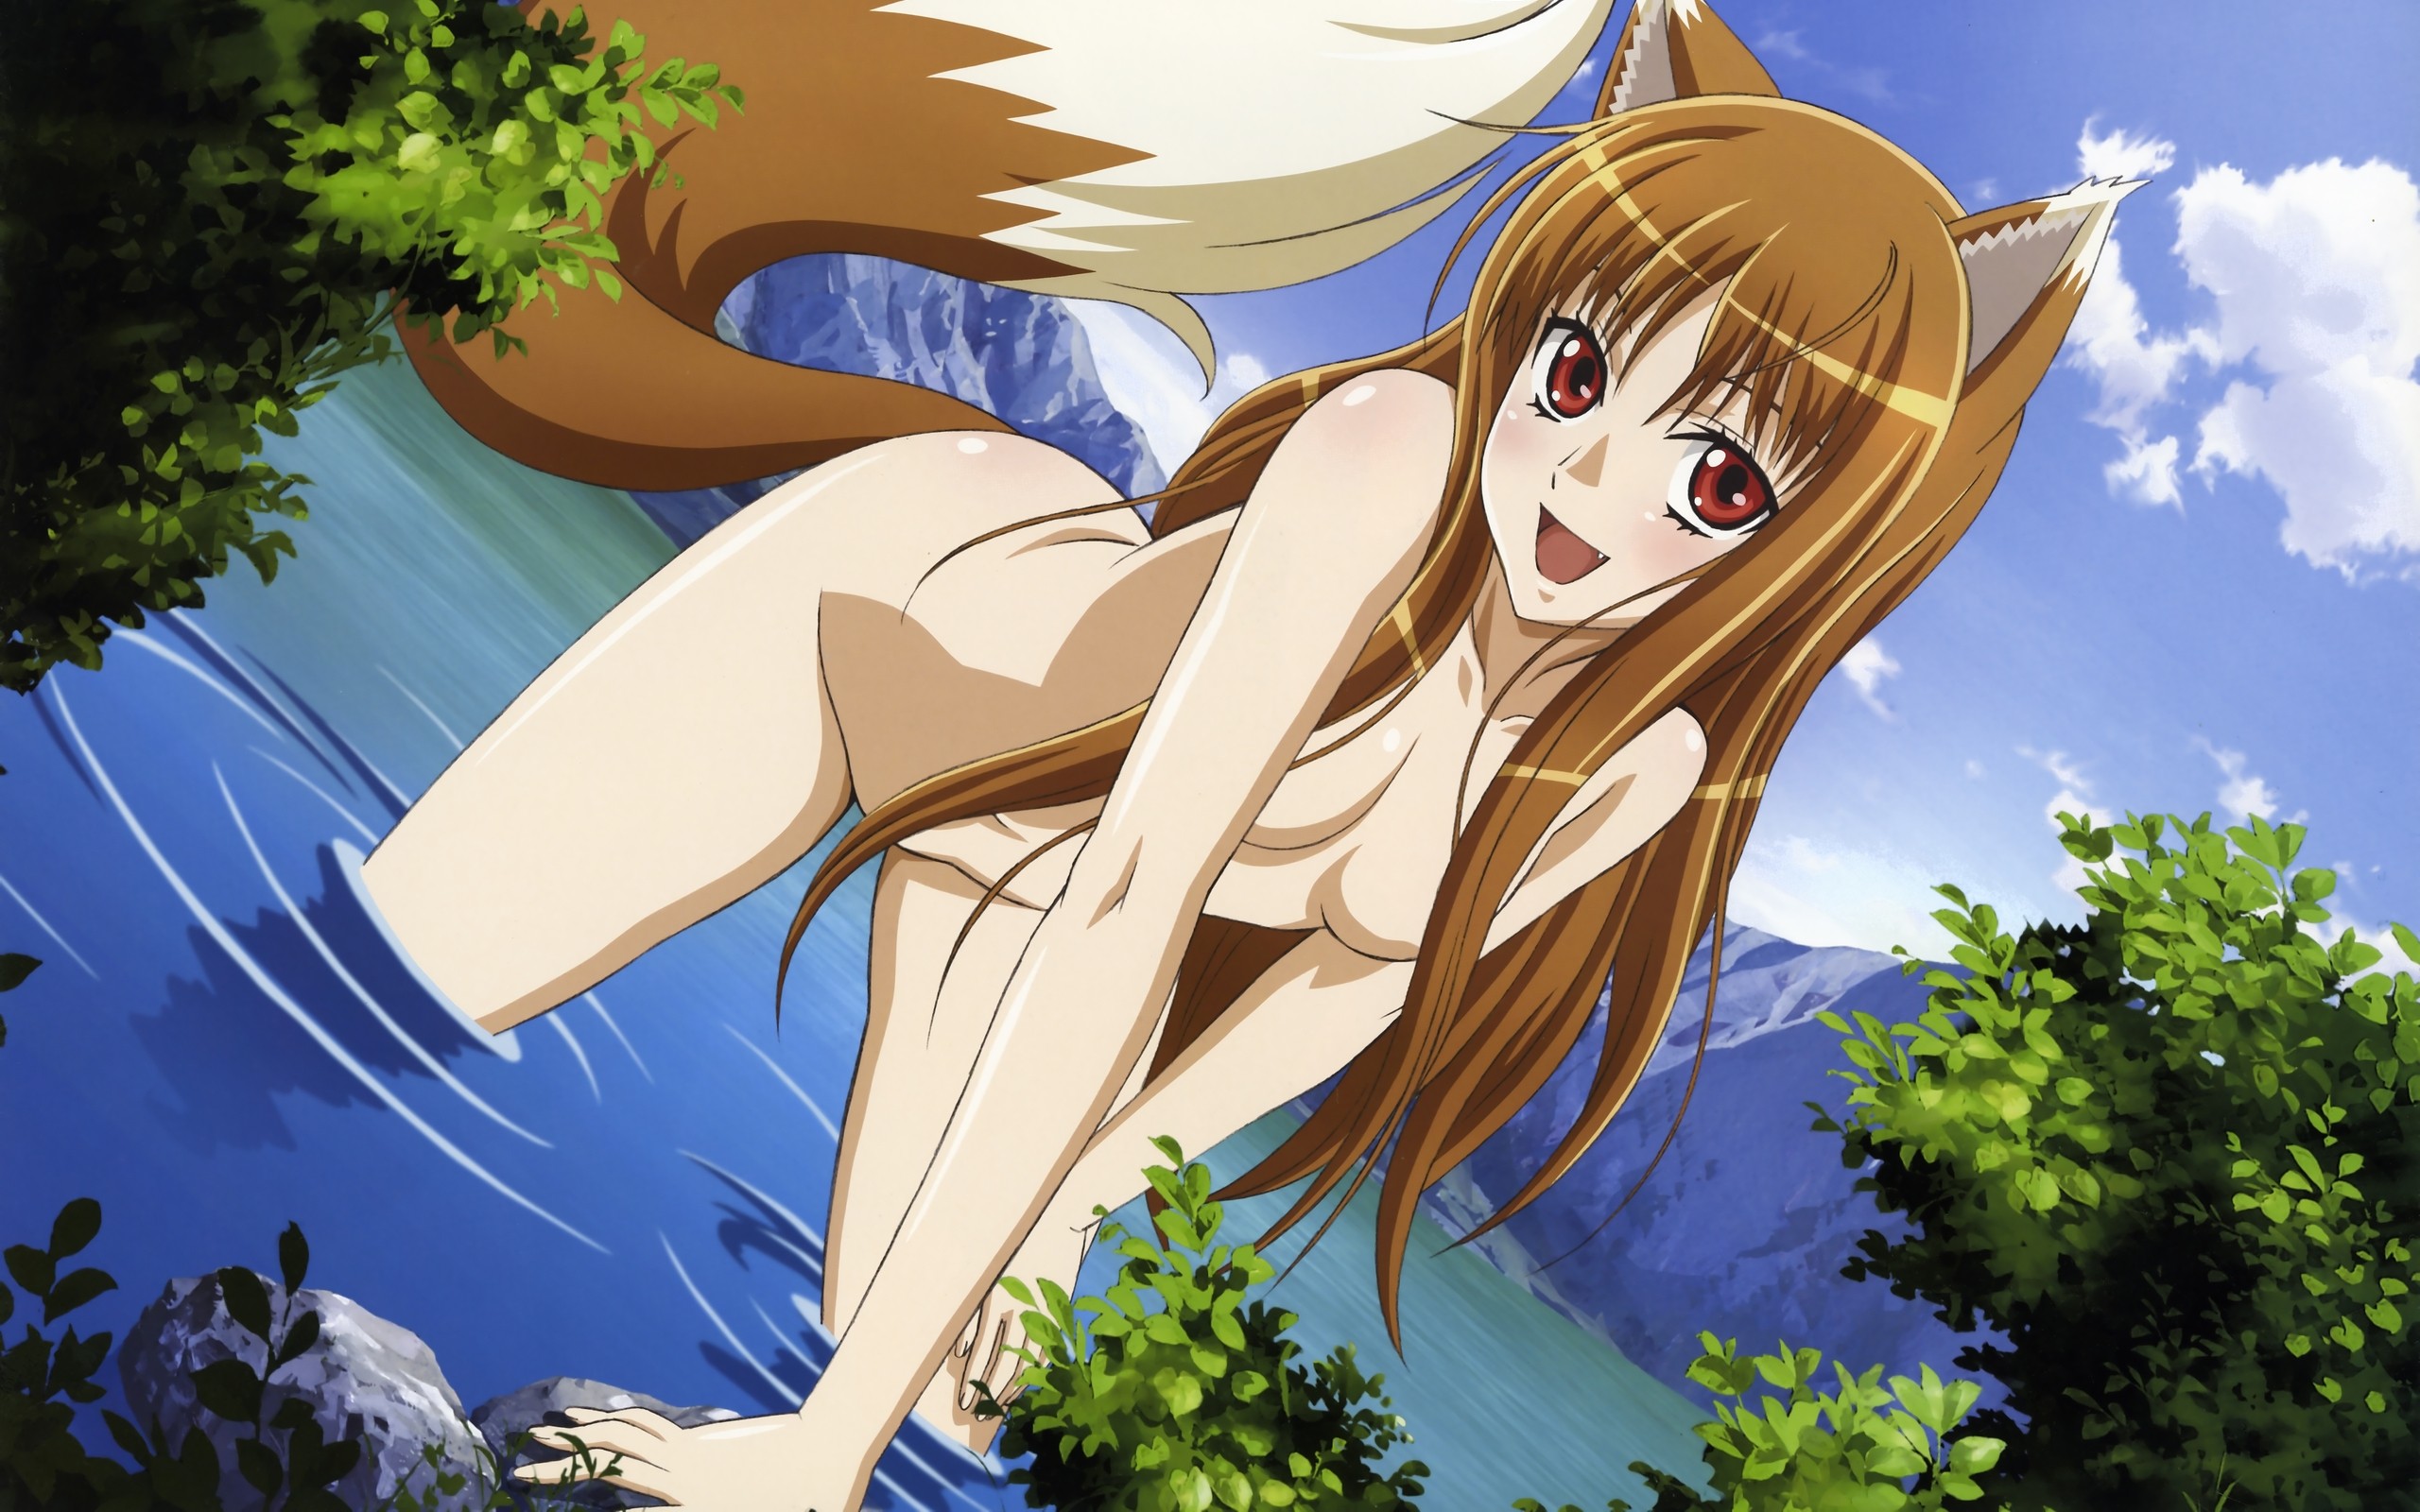 High Resolution Wallpaper | Spice And Wolf 2560x1600 px